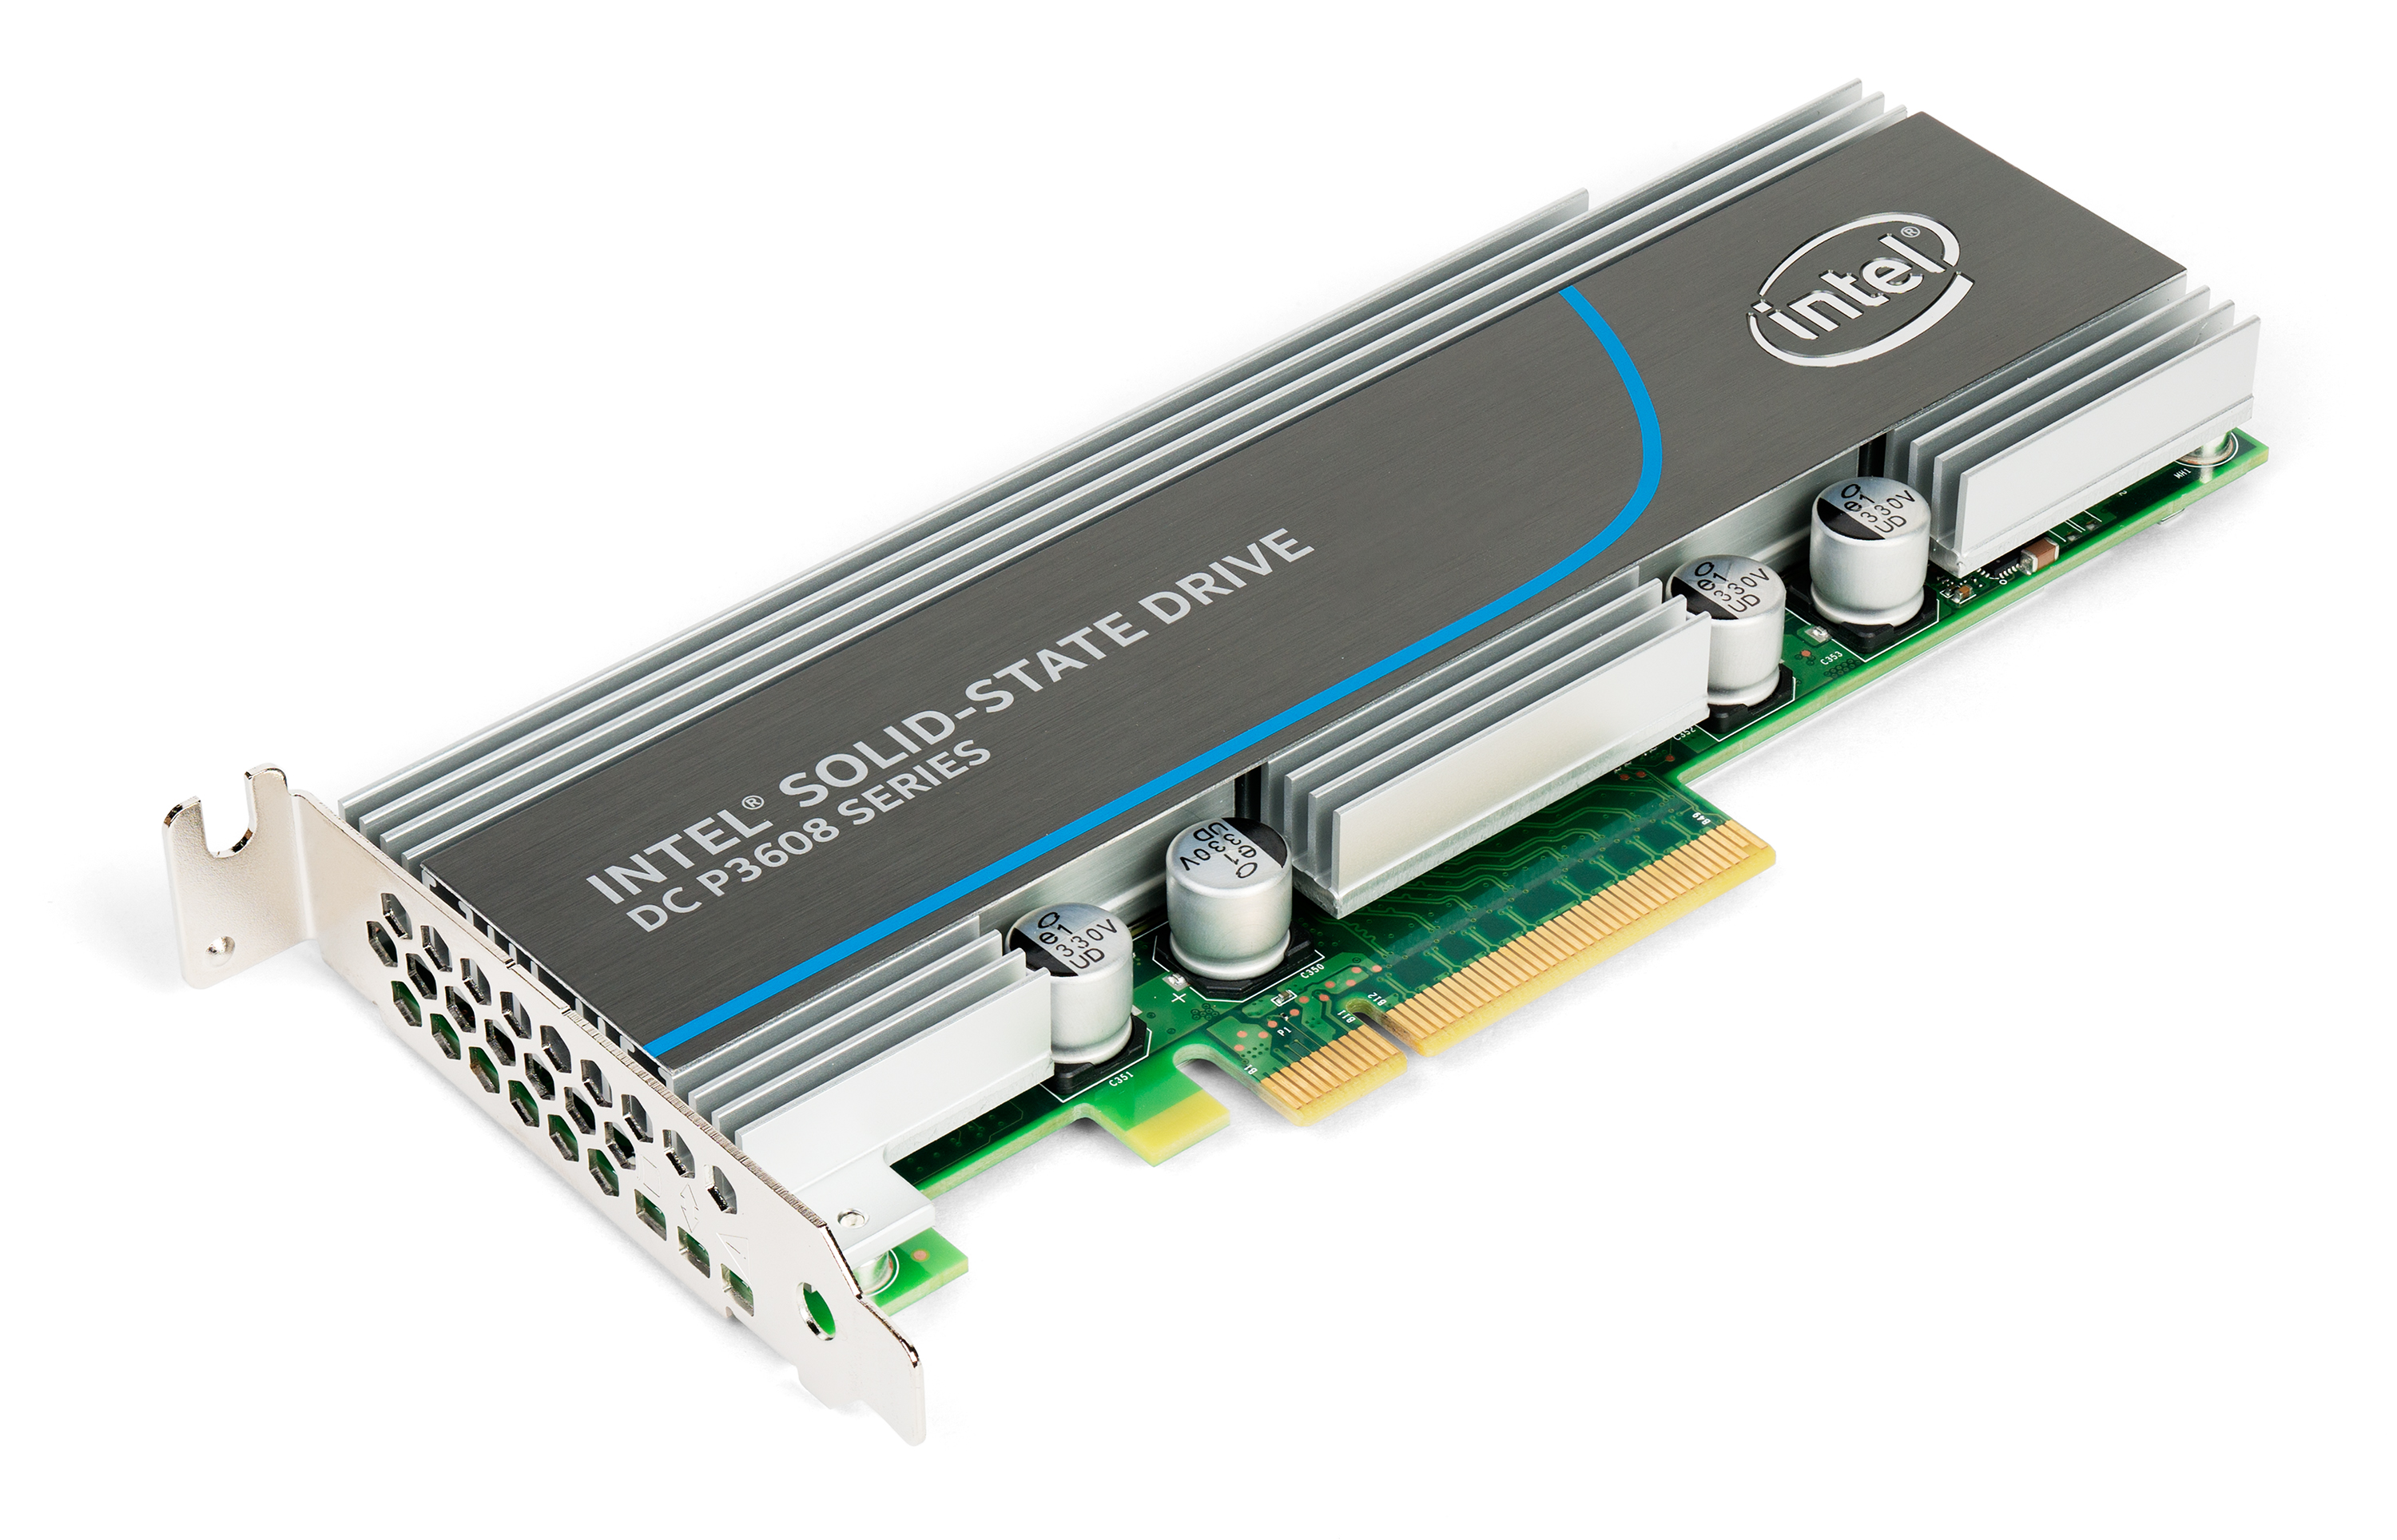 PCIe solid state drive